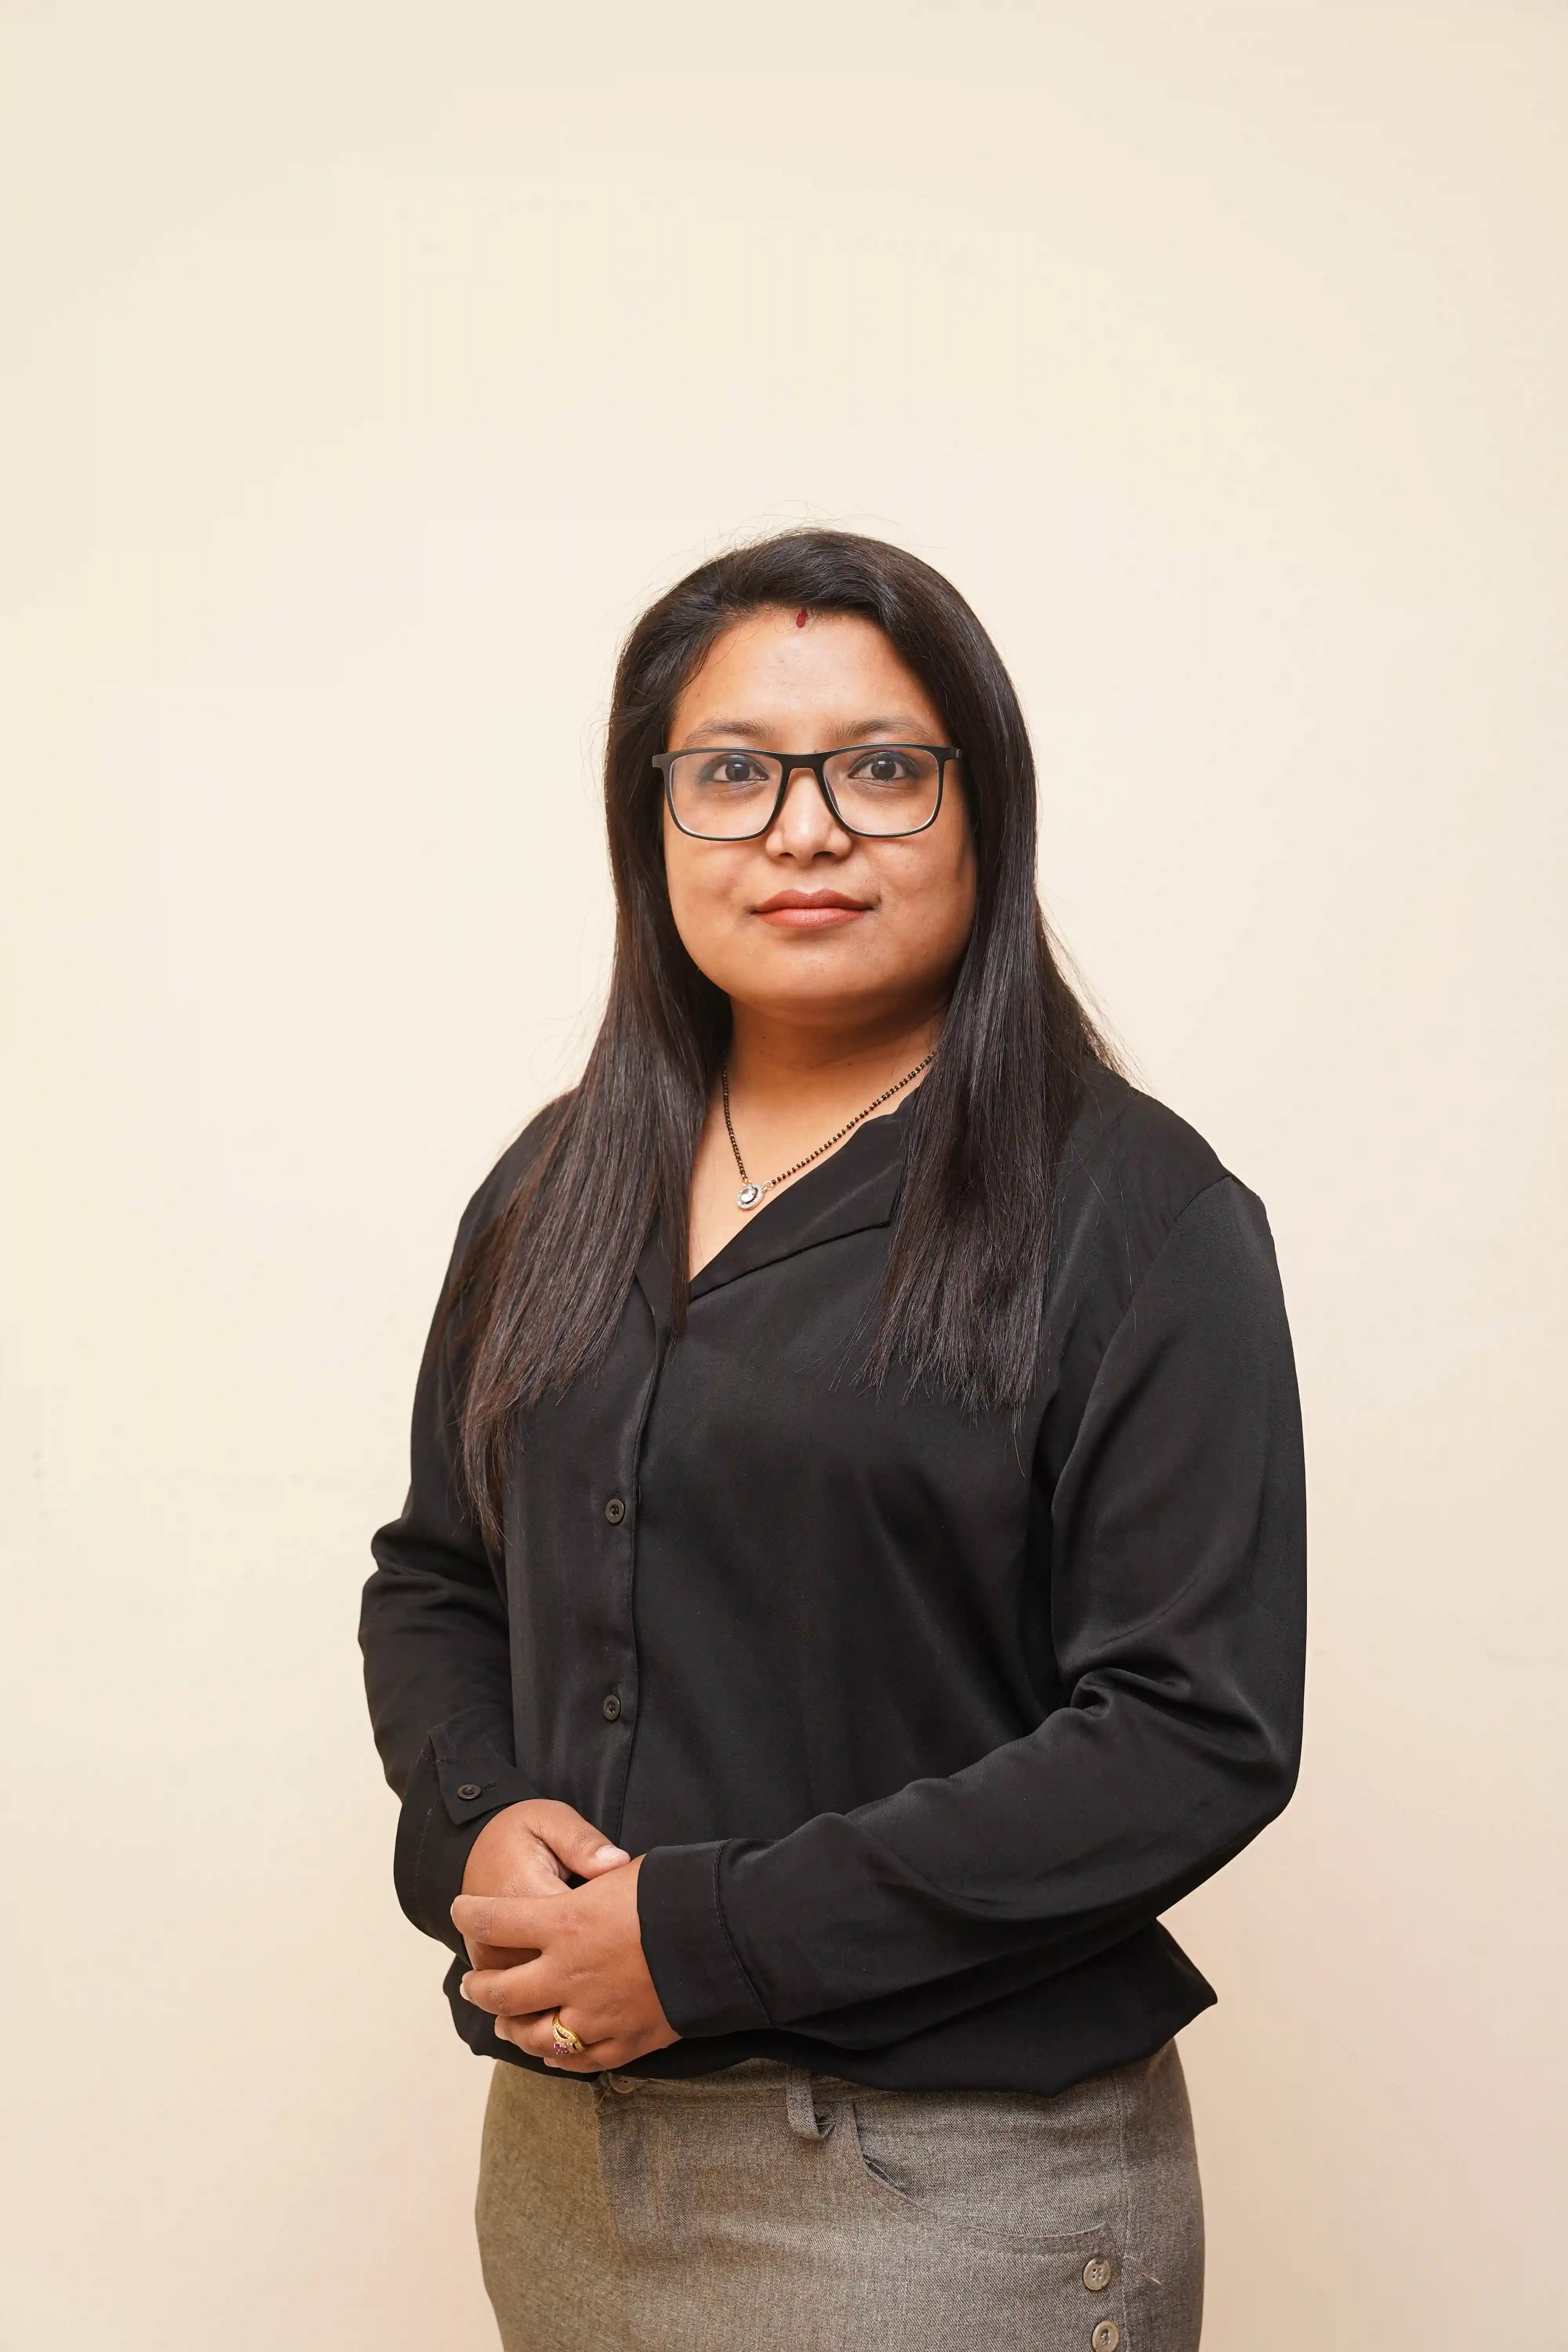 Meet Our Team- Asha & Company-Our team members at Asha & Company leverage their diverse industry experience to provide expert market research and consulting services in South East Asia.